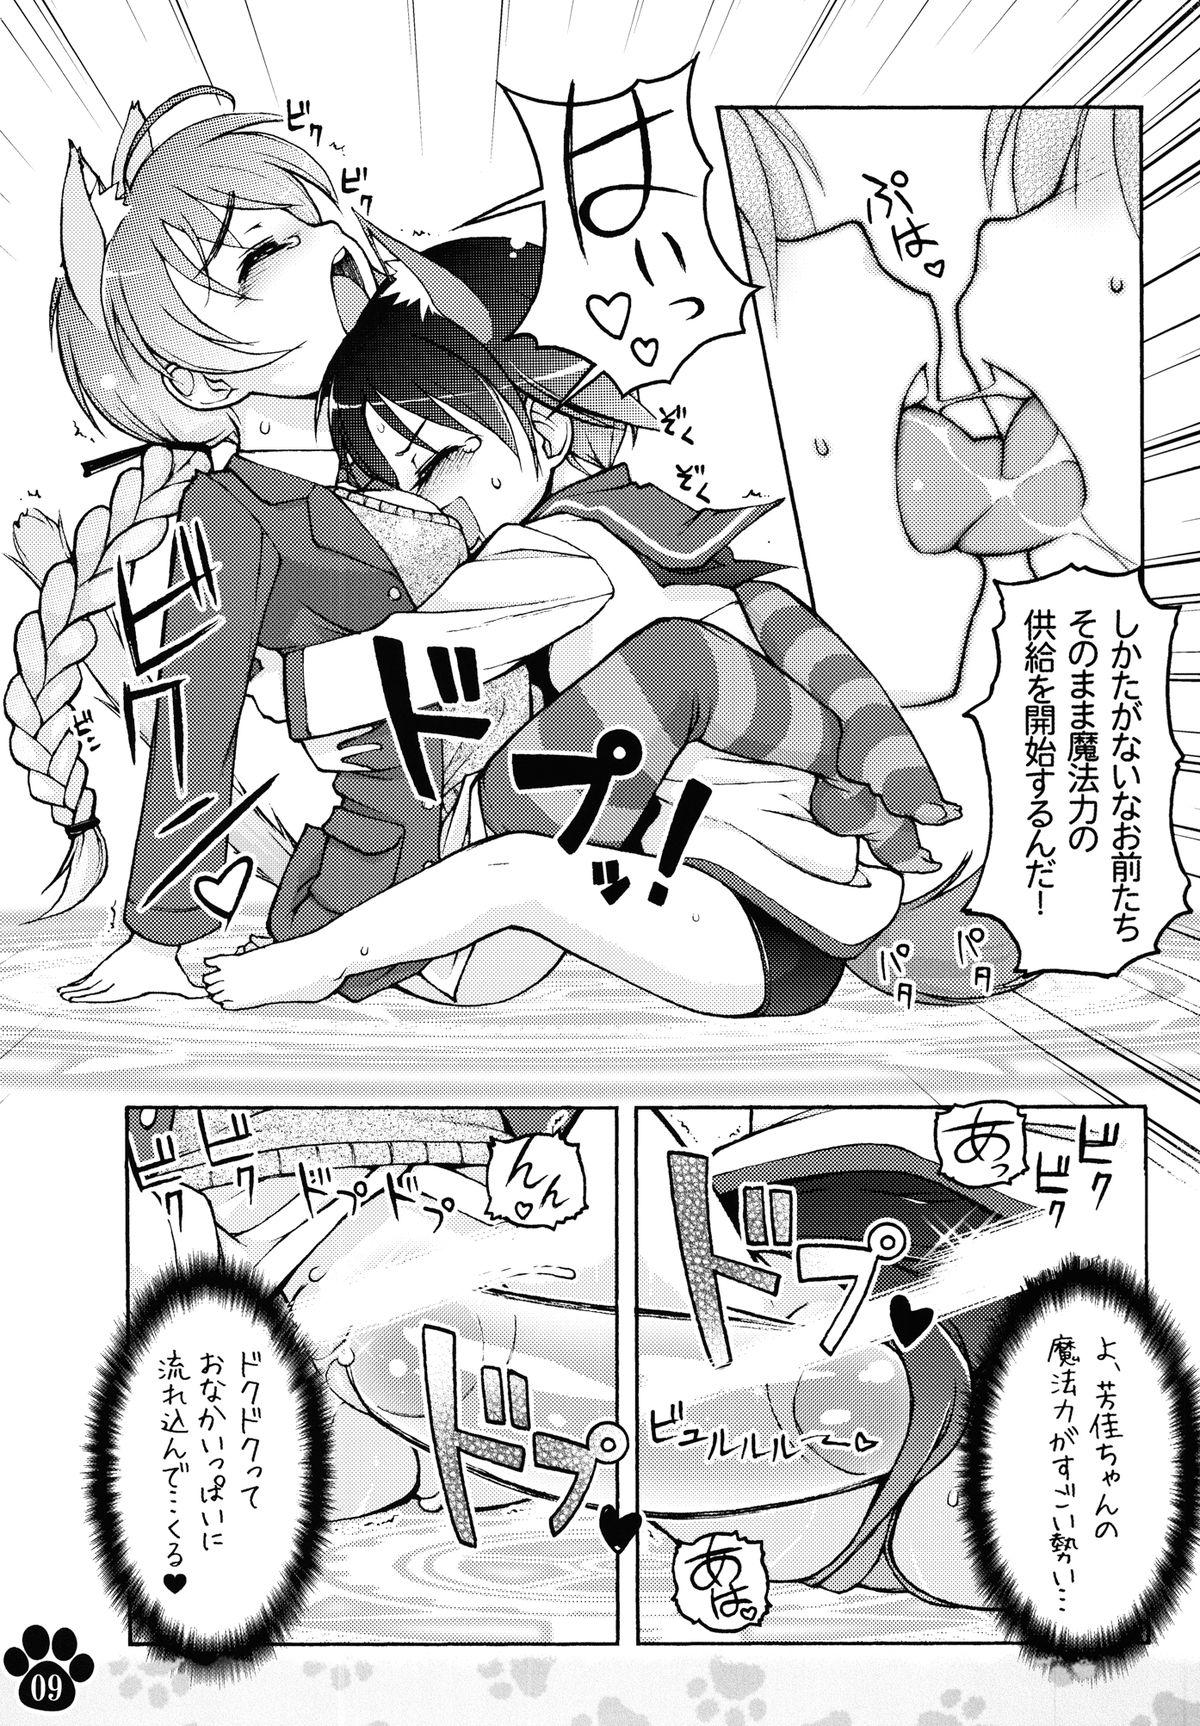 Cunt Maniawase Witches Plus - Strike witches Bukkake Boys - Page 9